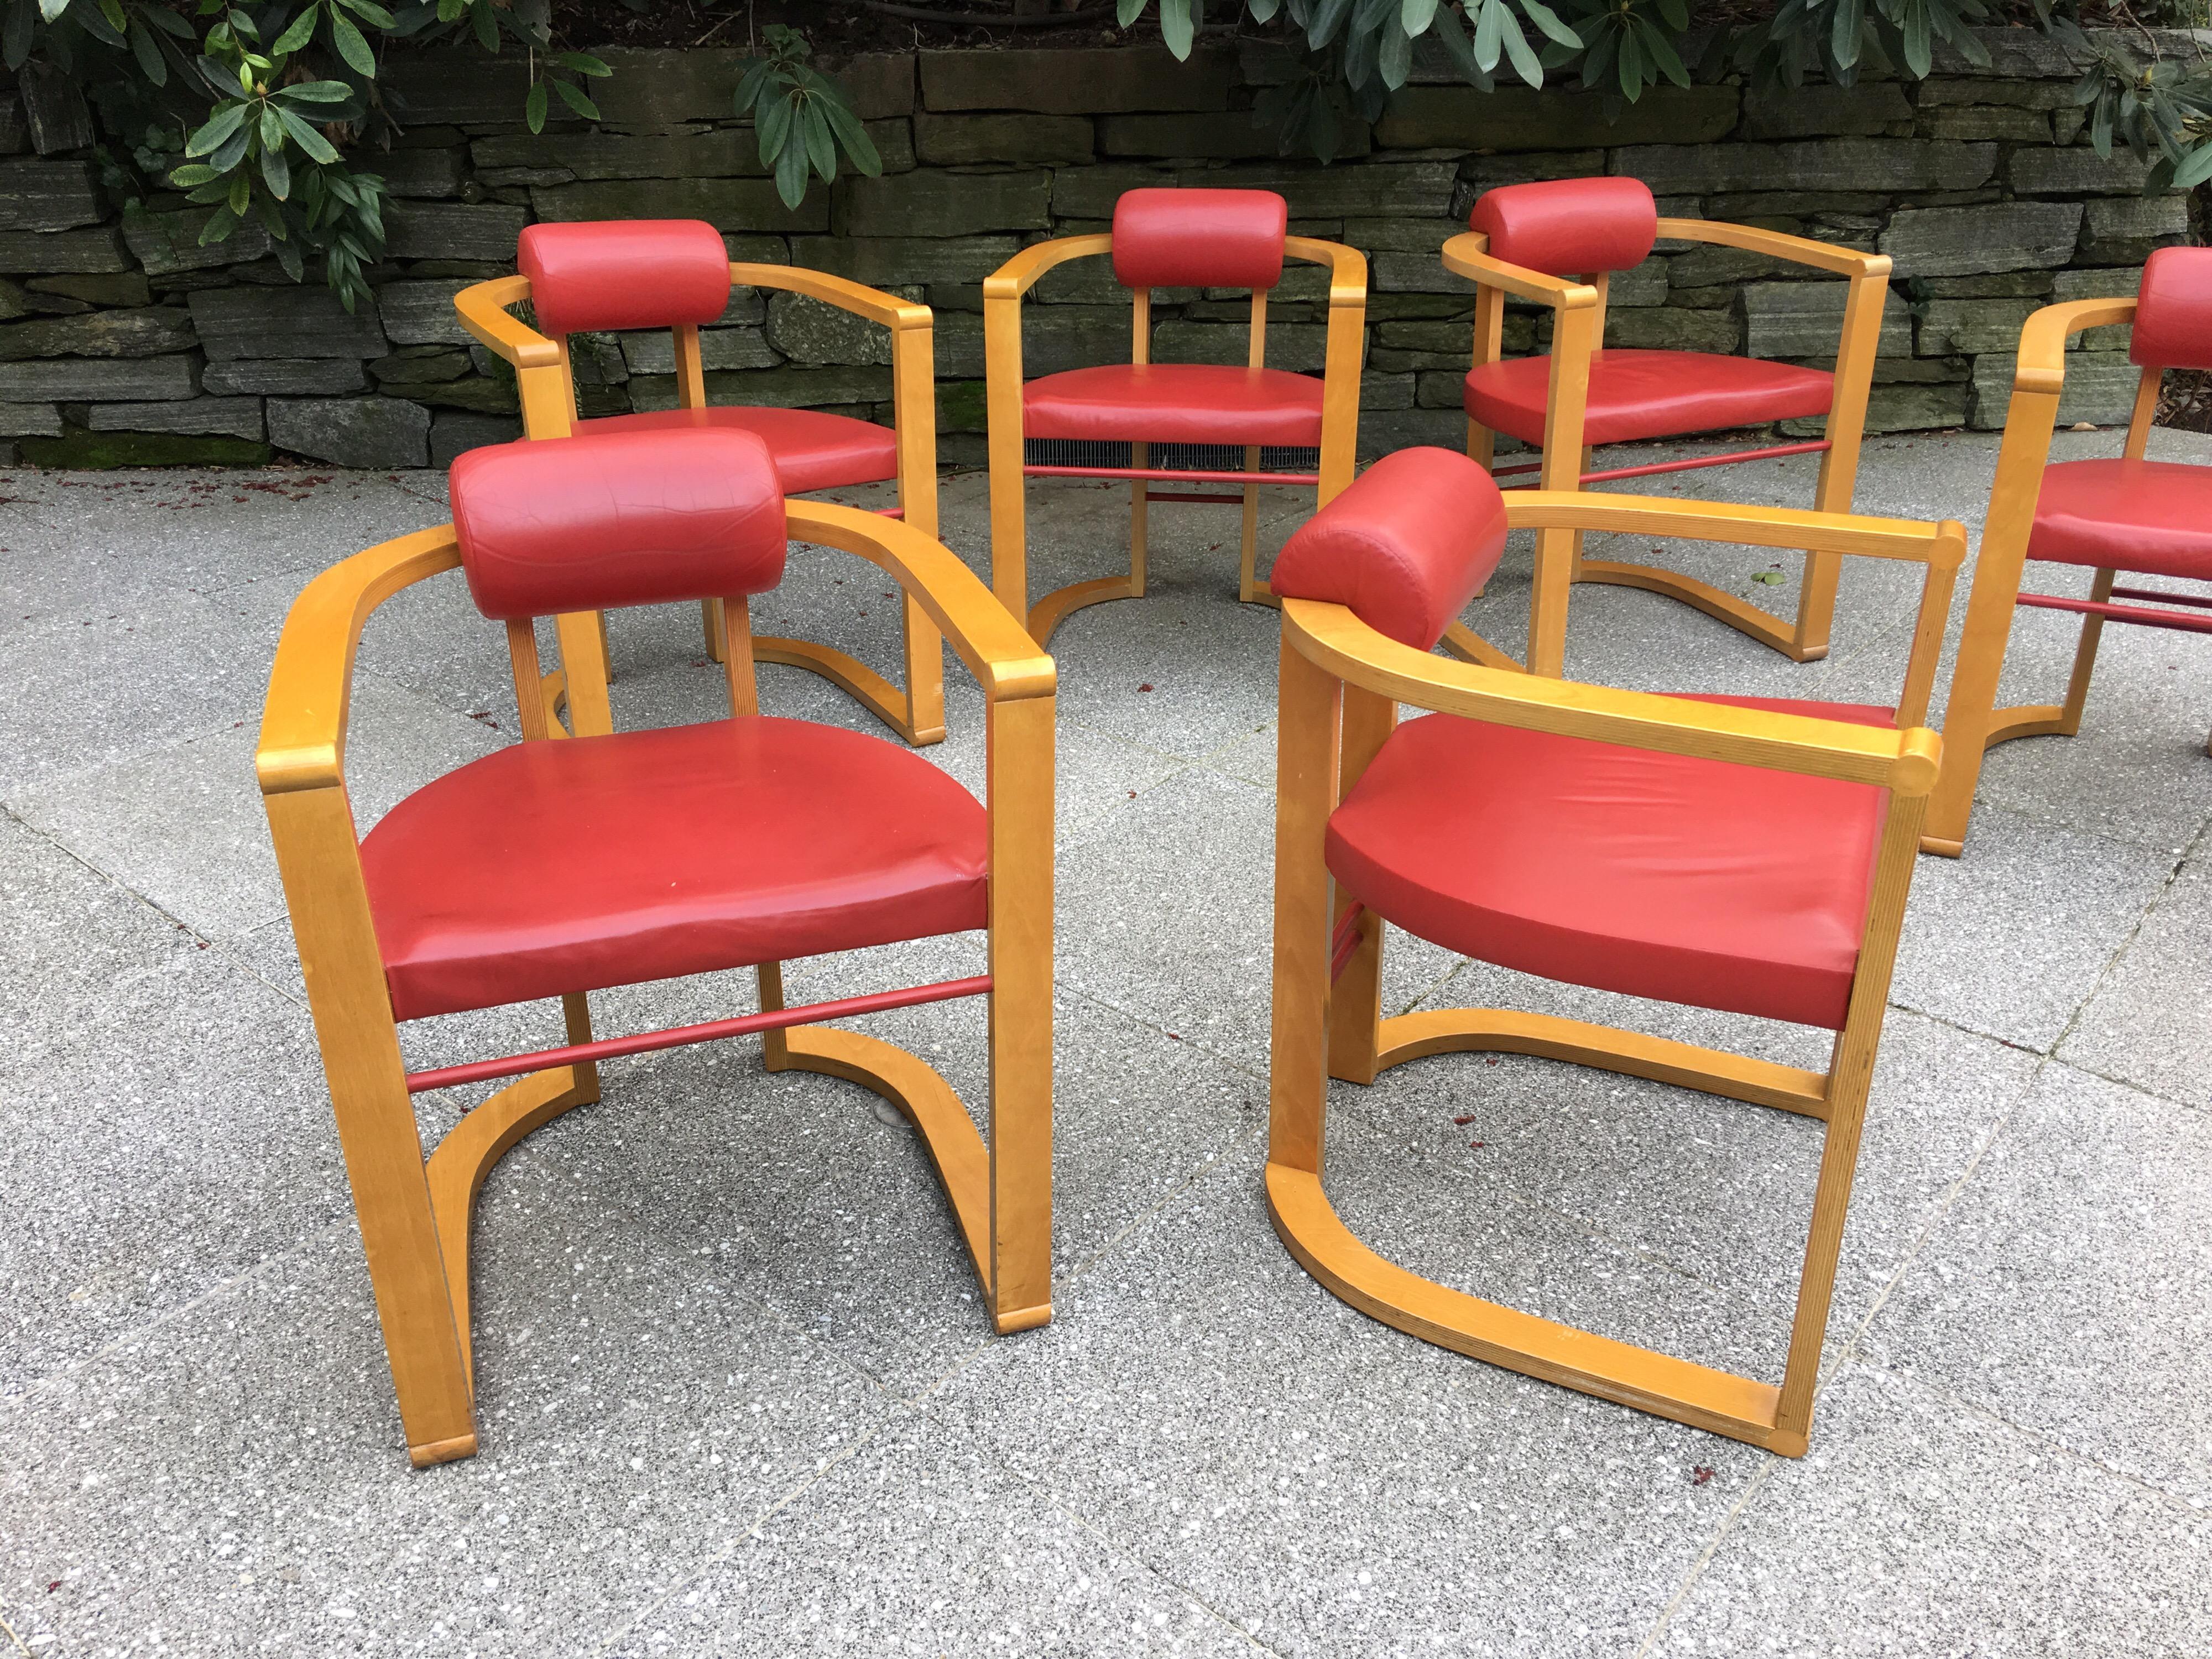 Set of 6 George Kasparian dining chairs in a blond finish with red leather Upholstery. Wood is made up of laminated layers of birch or maple. From the original owners, purchased in 1988. Shown in last photo with a custom designed burled maple